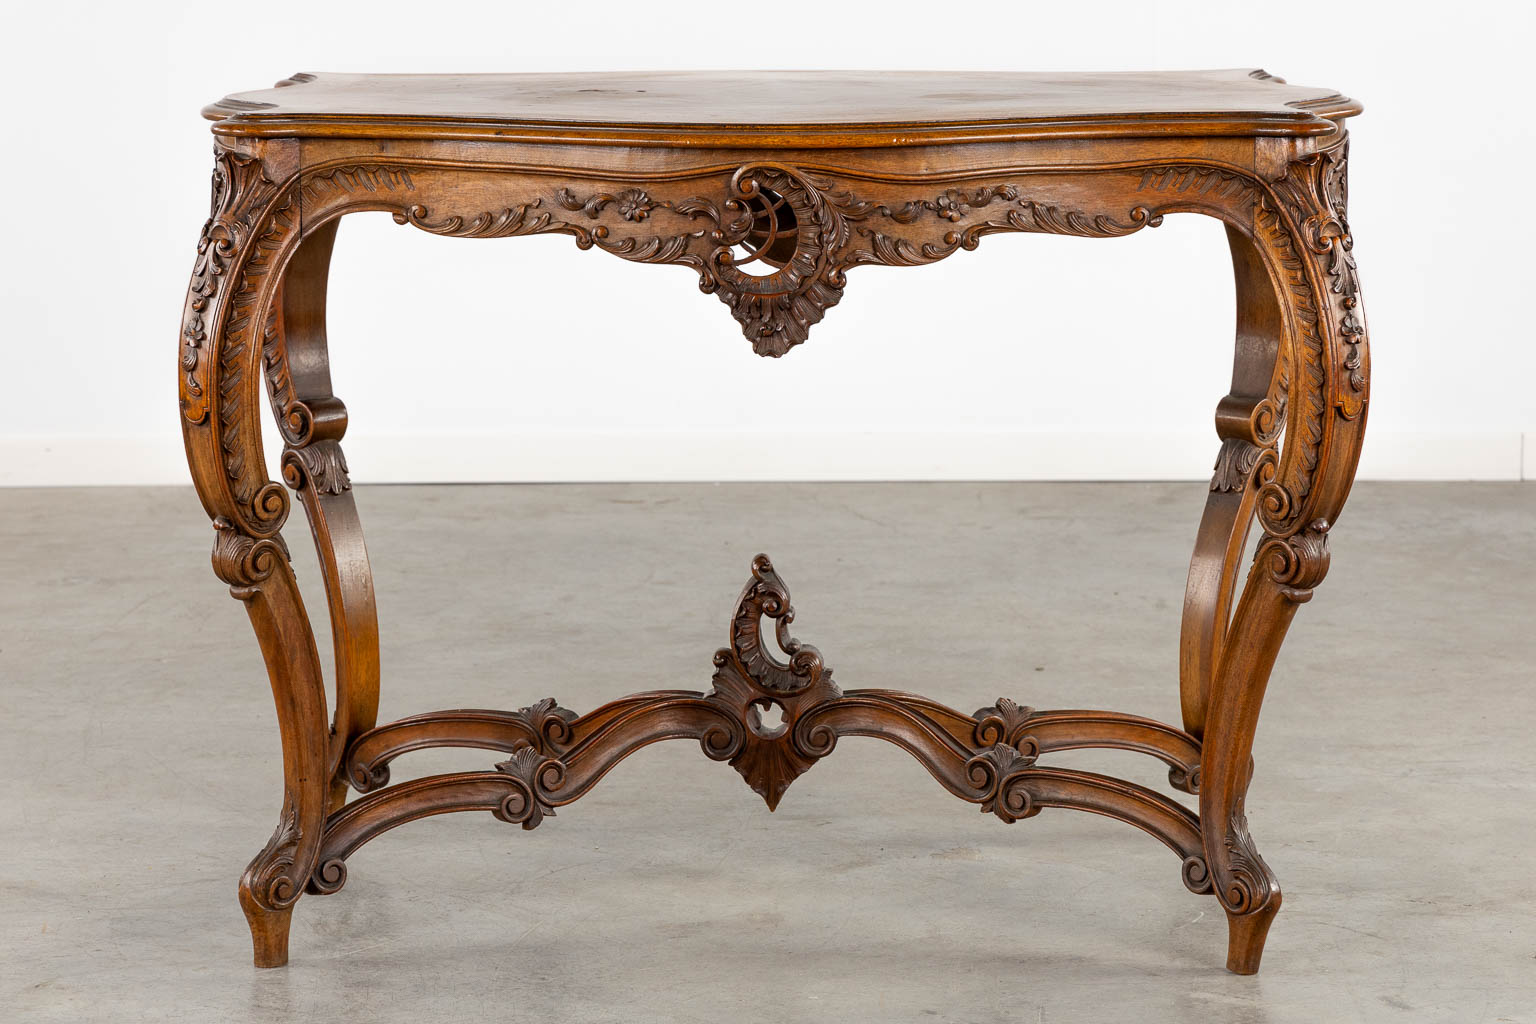 An 8-piece salon suite, sculptured wood in Louis XV style. Circa 1900. (L:67 x W:135 x H:103 cm) - Image 26 of 33